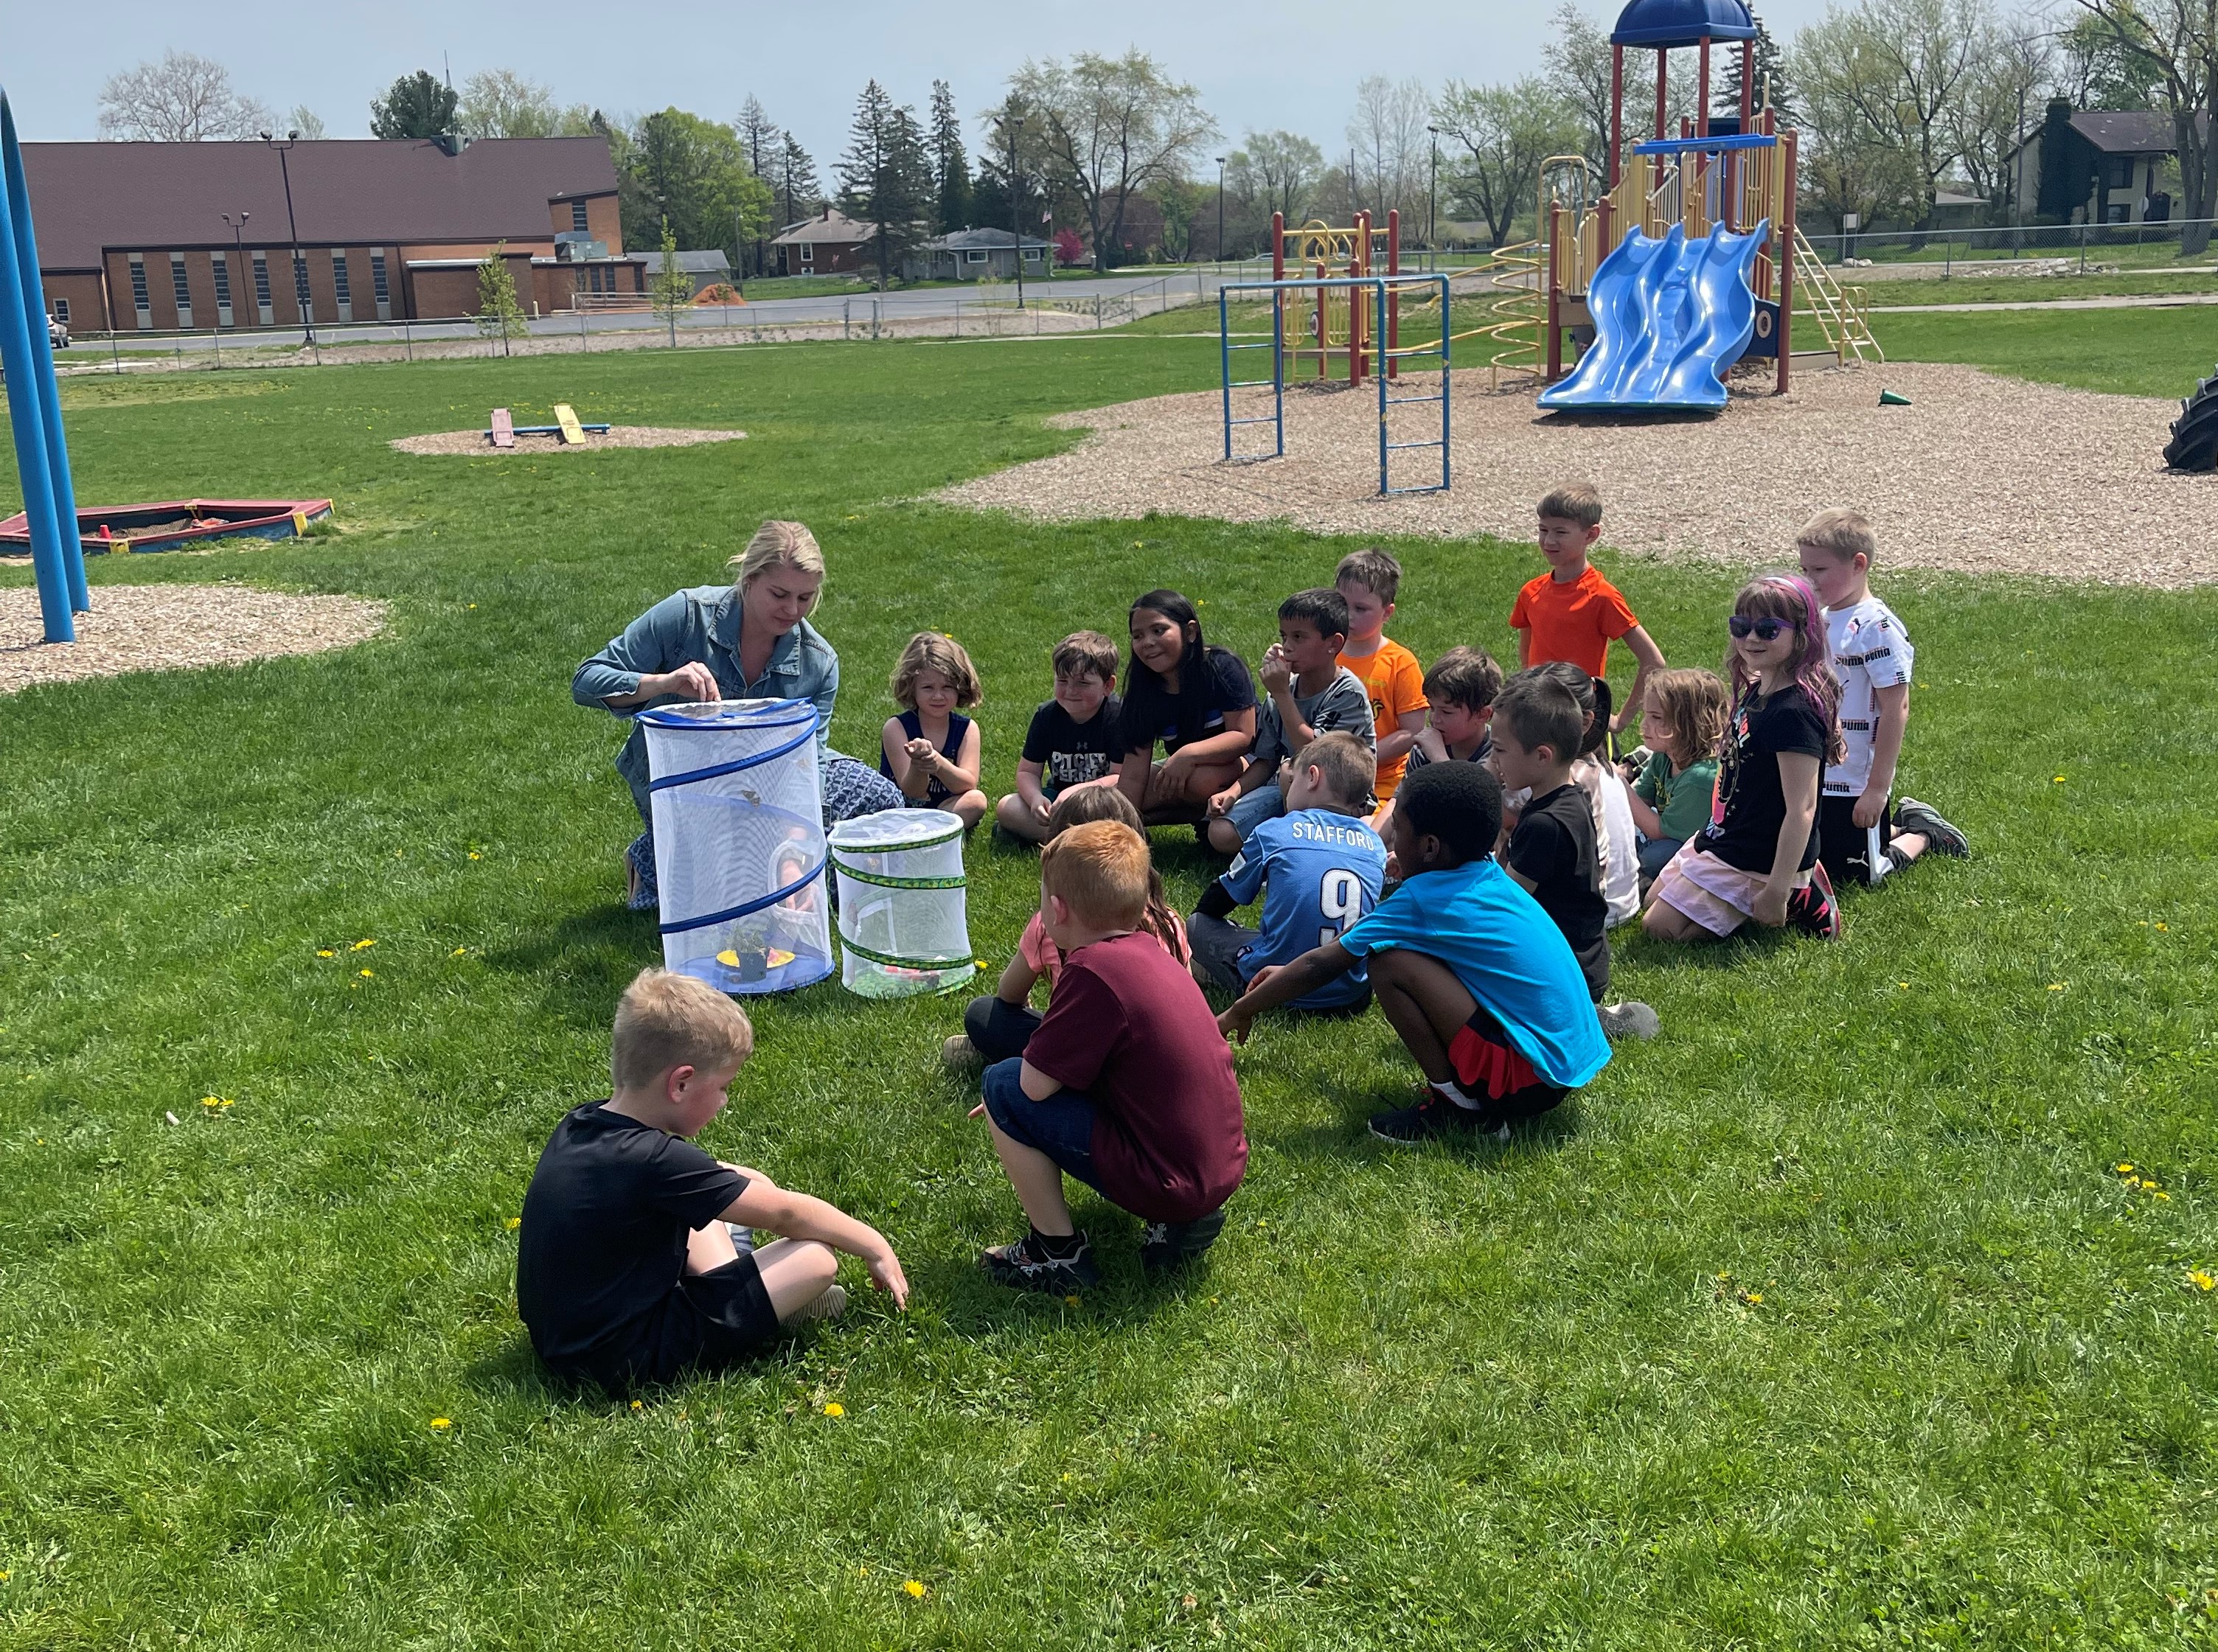 A group of about  15 students sit outside on the lawn while a teacher shows butterflies in butterfly houses.  There is a playground in the background.